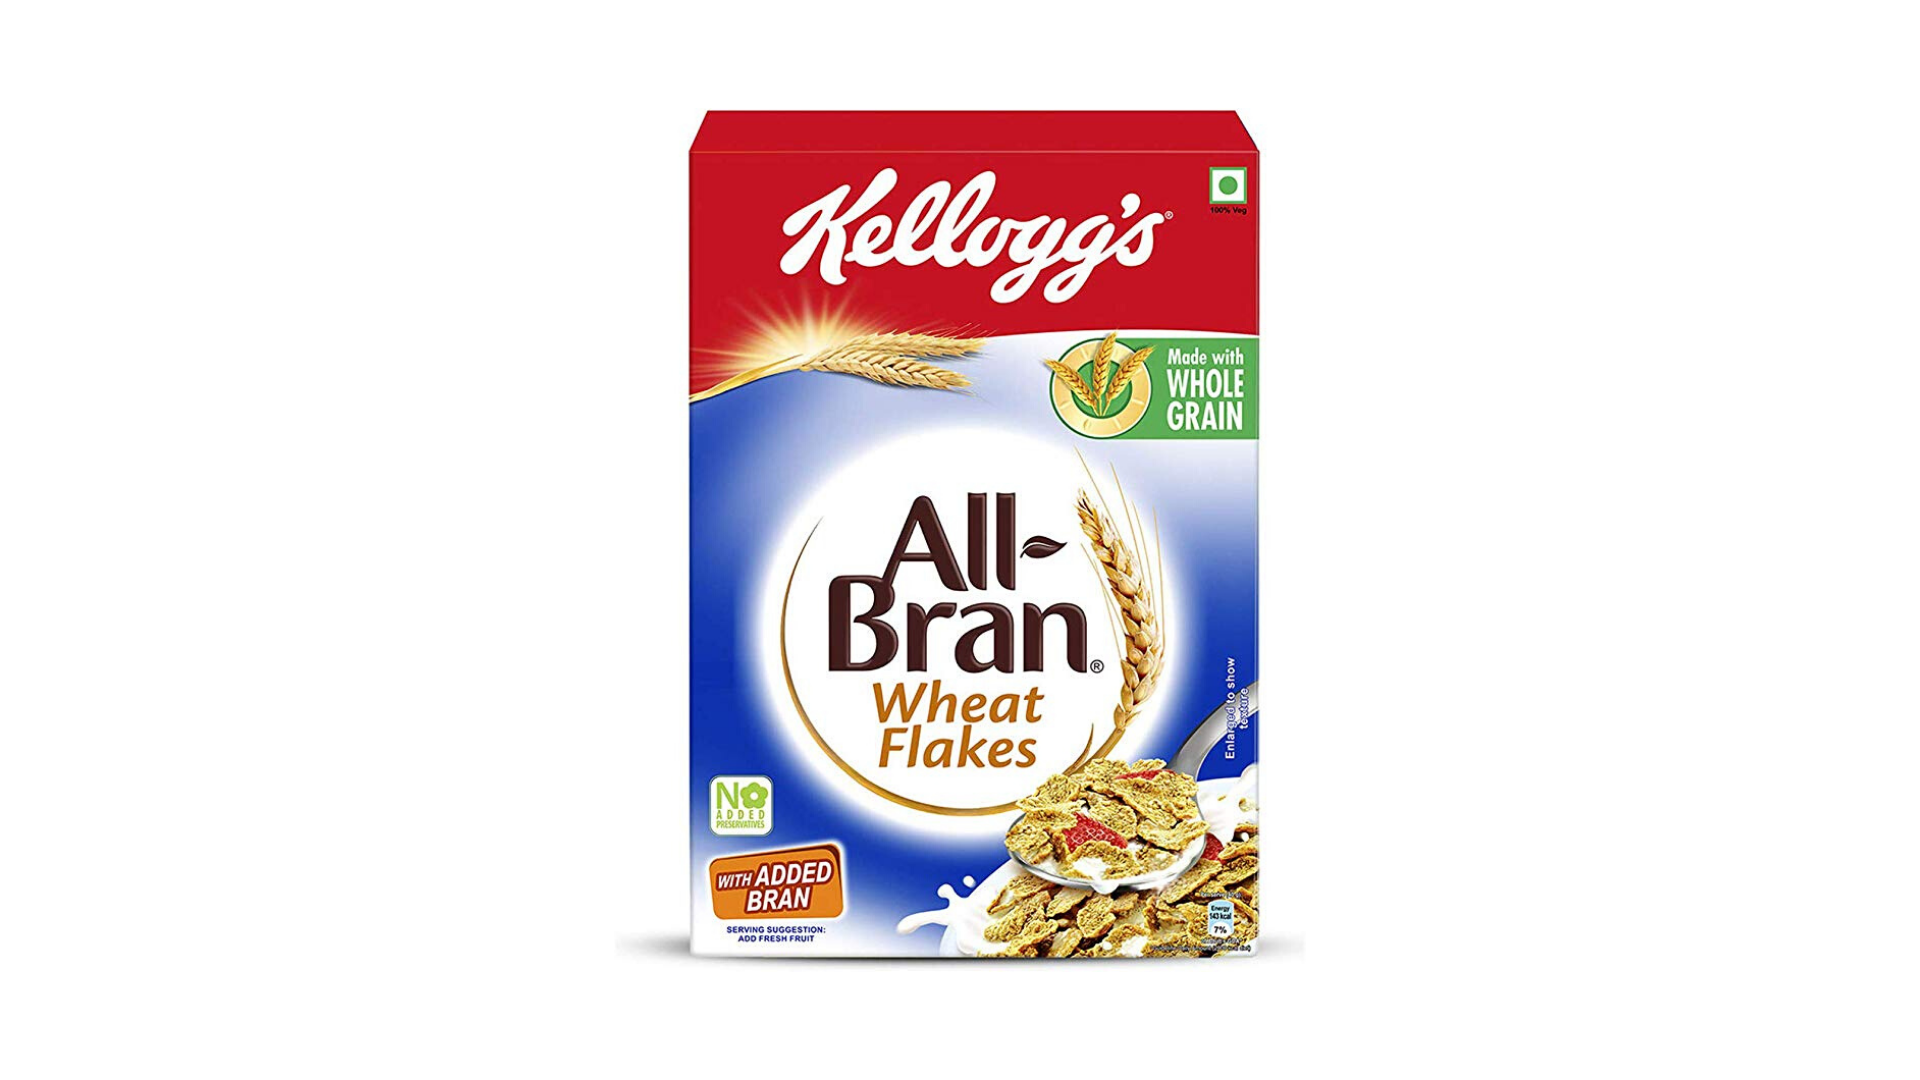 A packet of All-Bran Wheat Flakes from Kellogg&#x27;s.